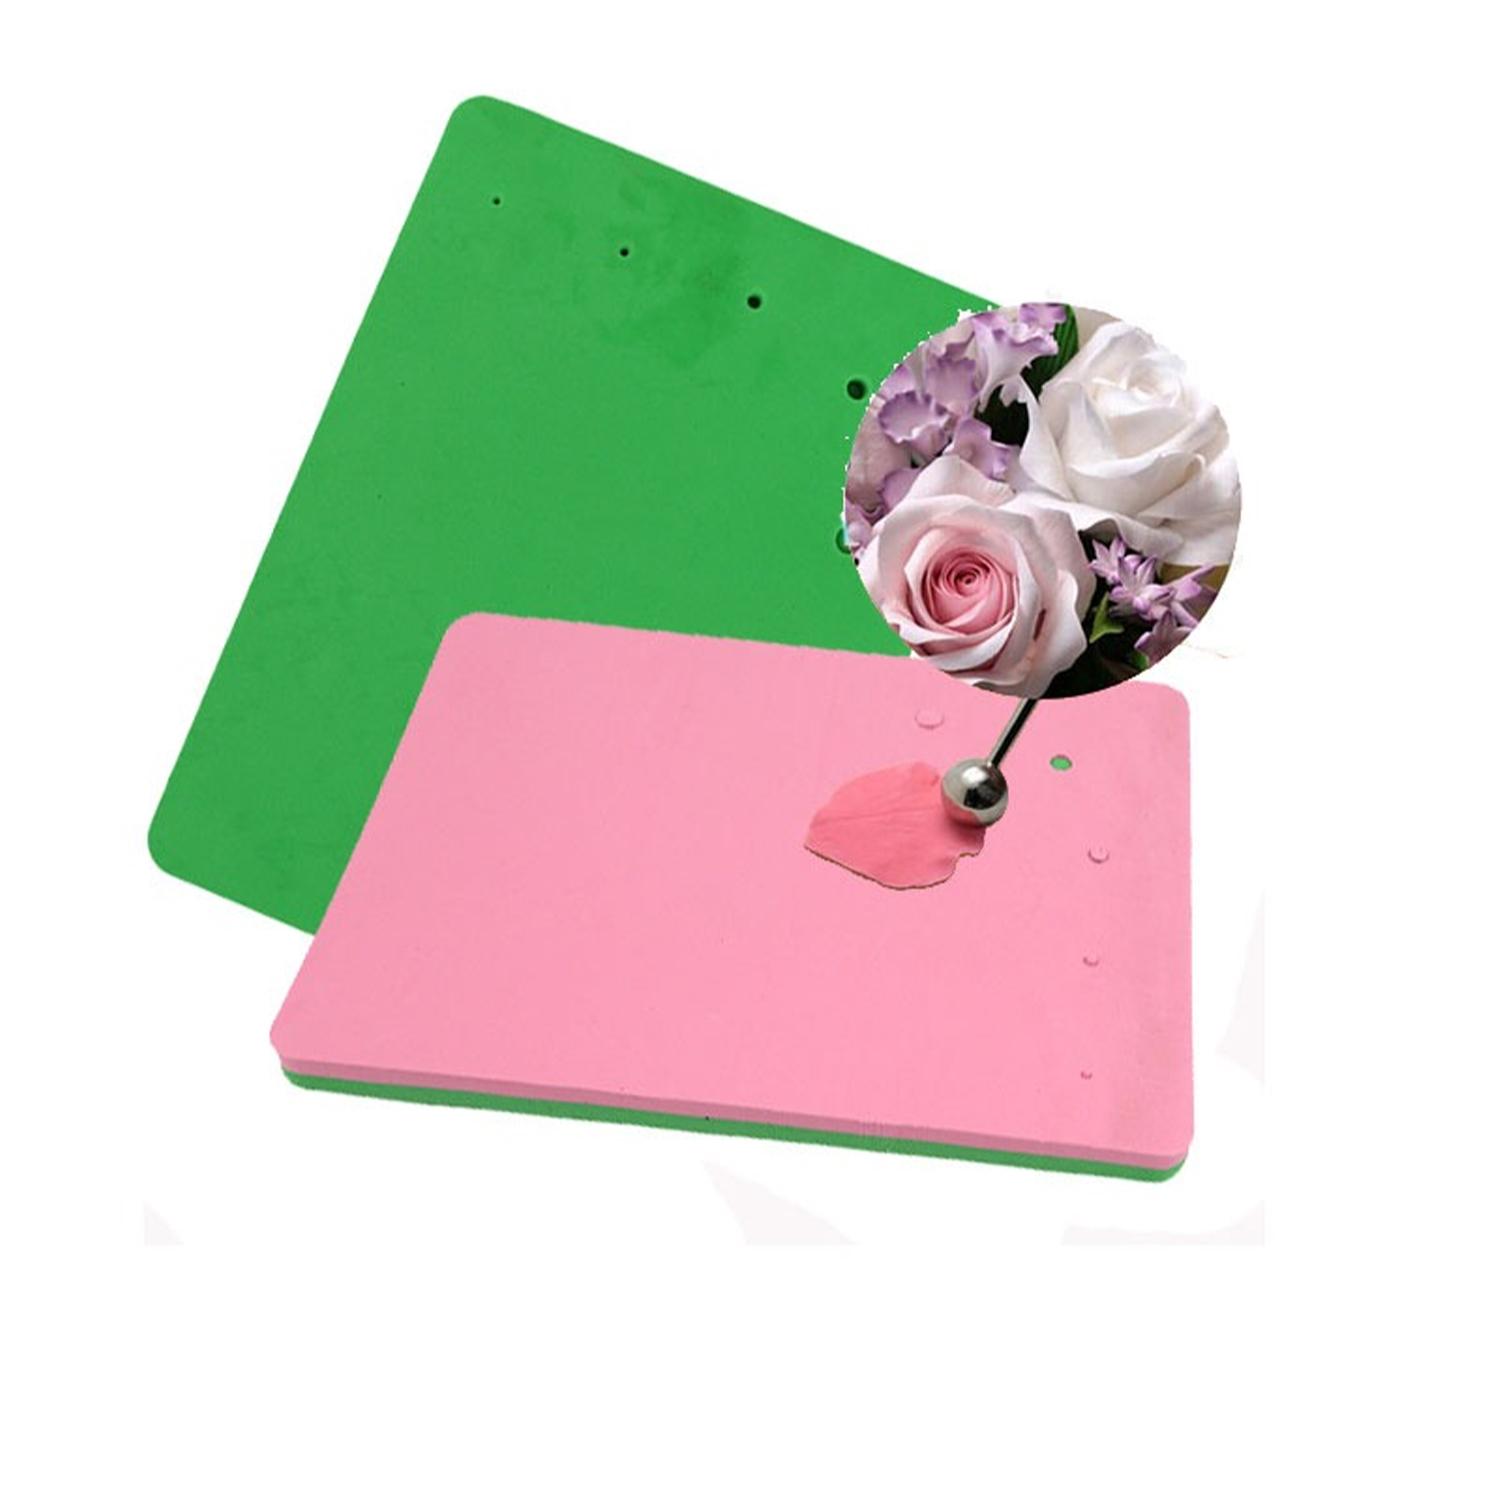 GREEN AND PINK FLOWER FOAM PADS